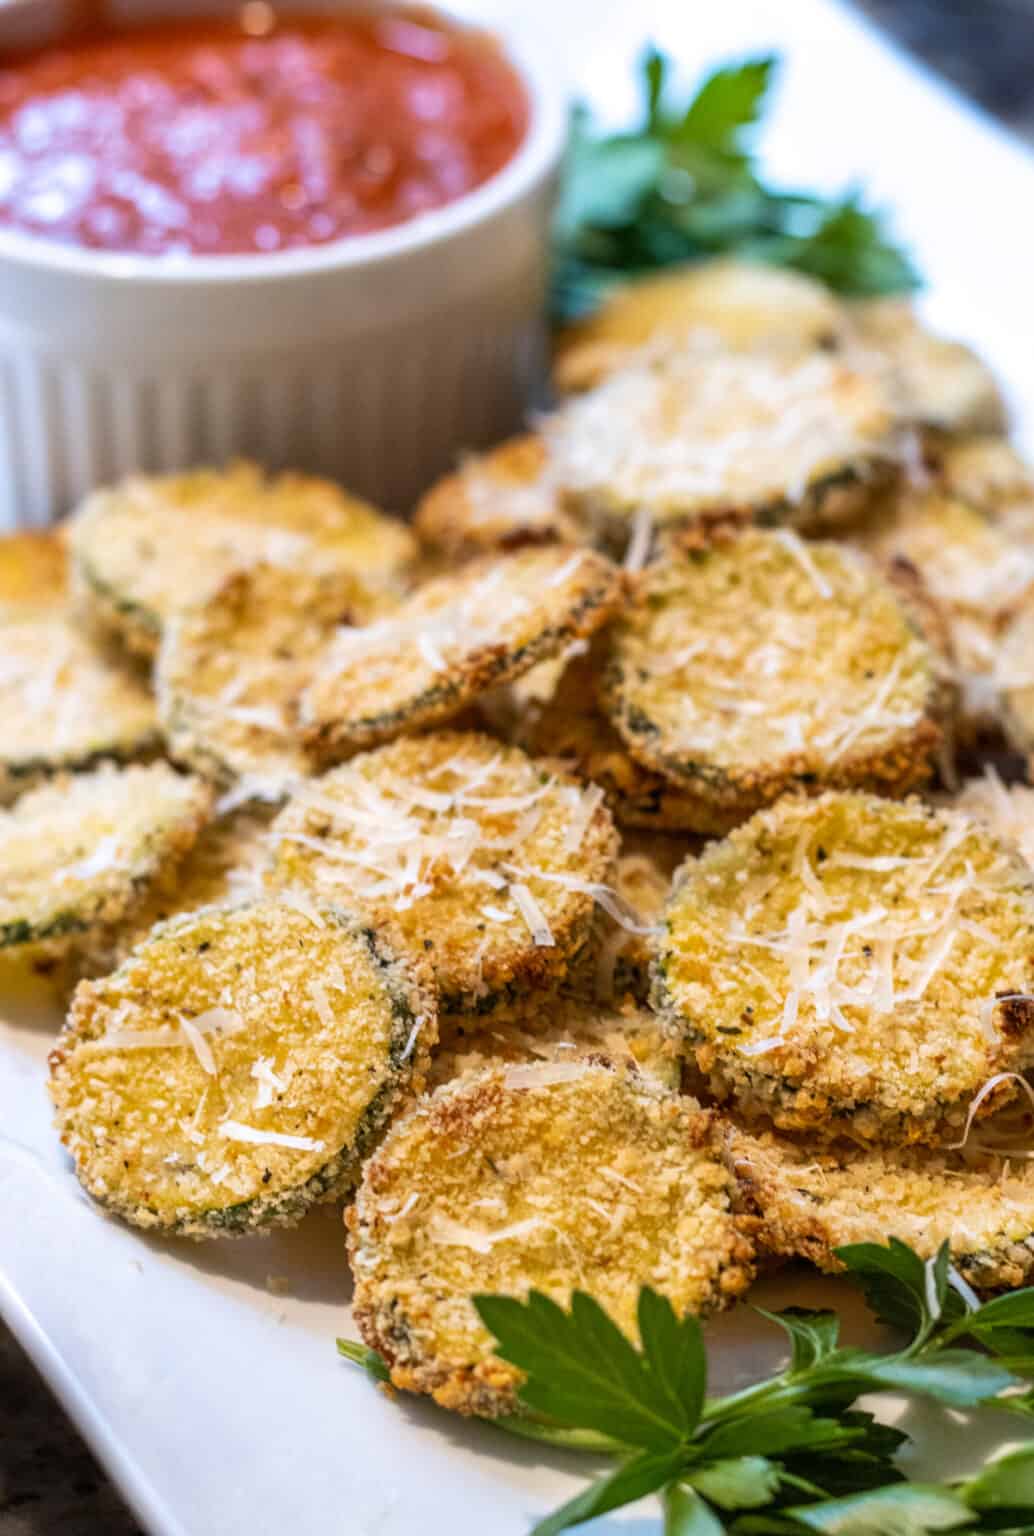 Crispy Oven Fried Zucchini Chips - This Home Kitchen